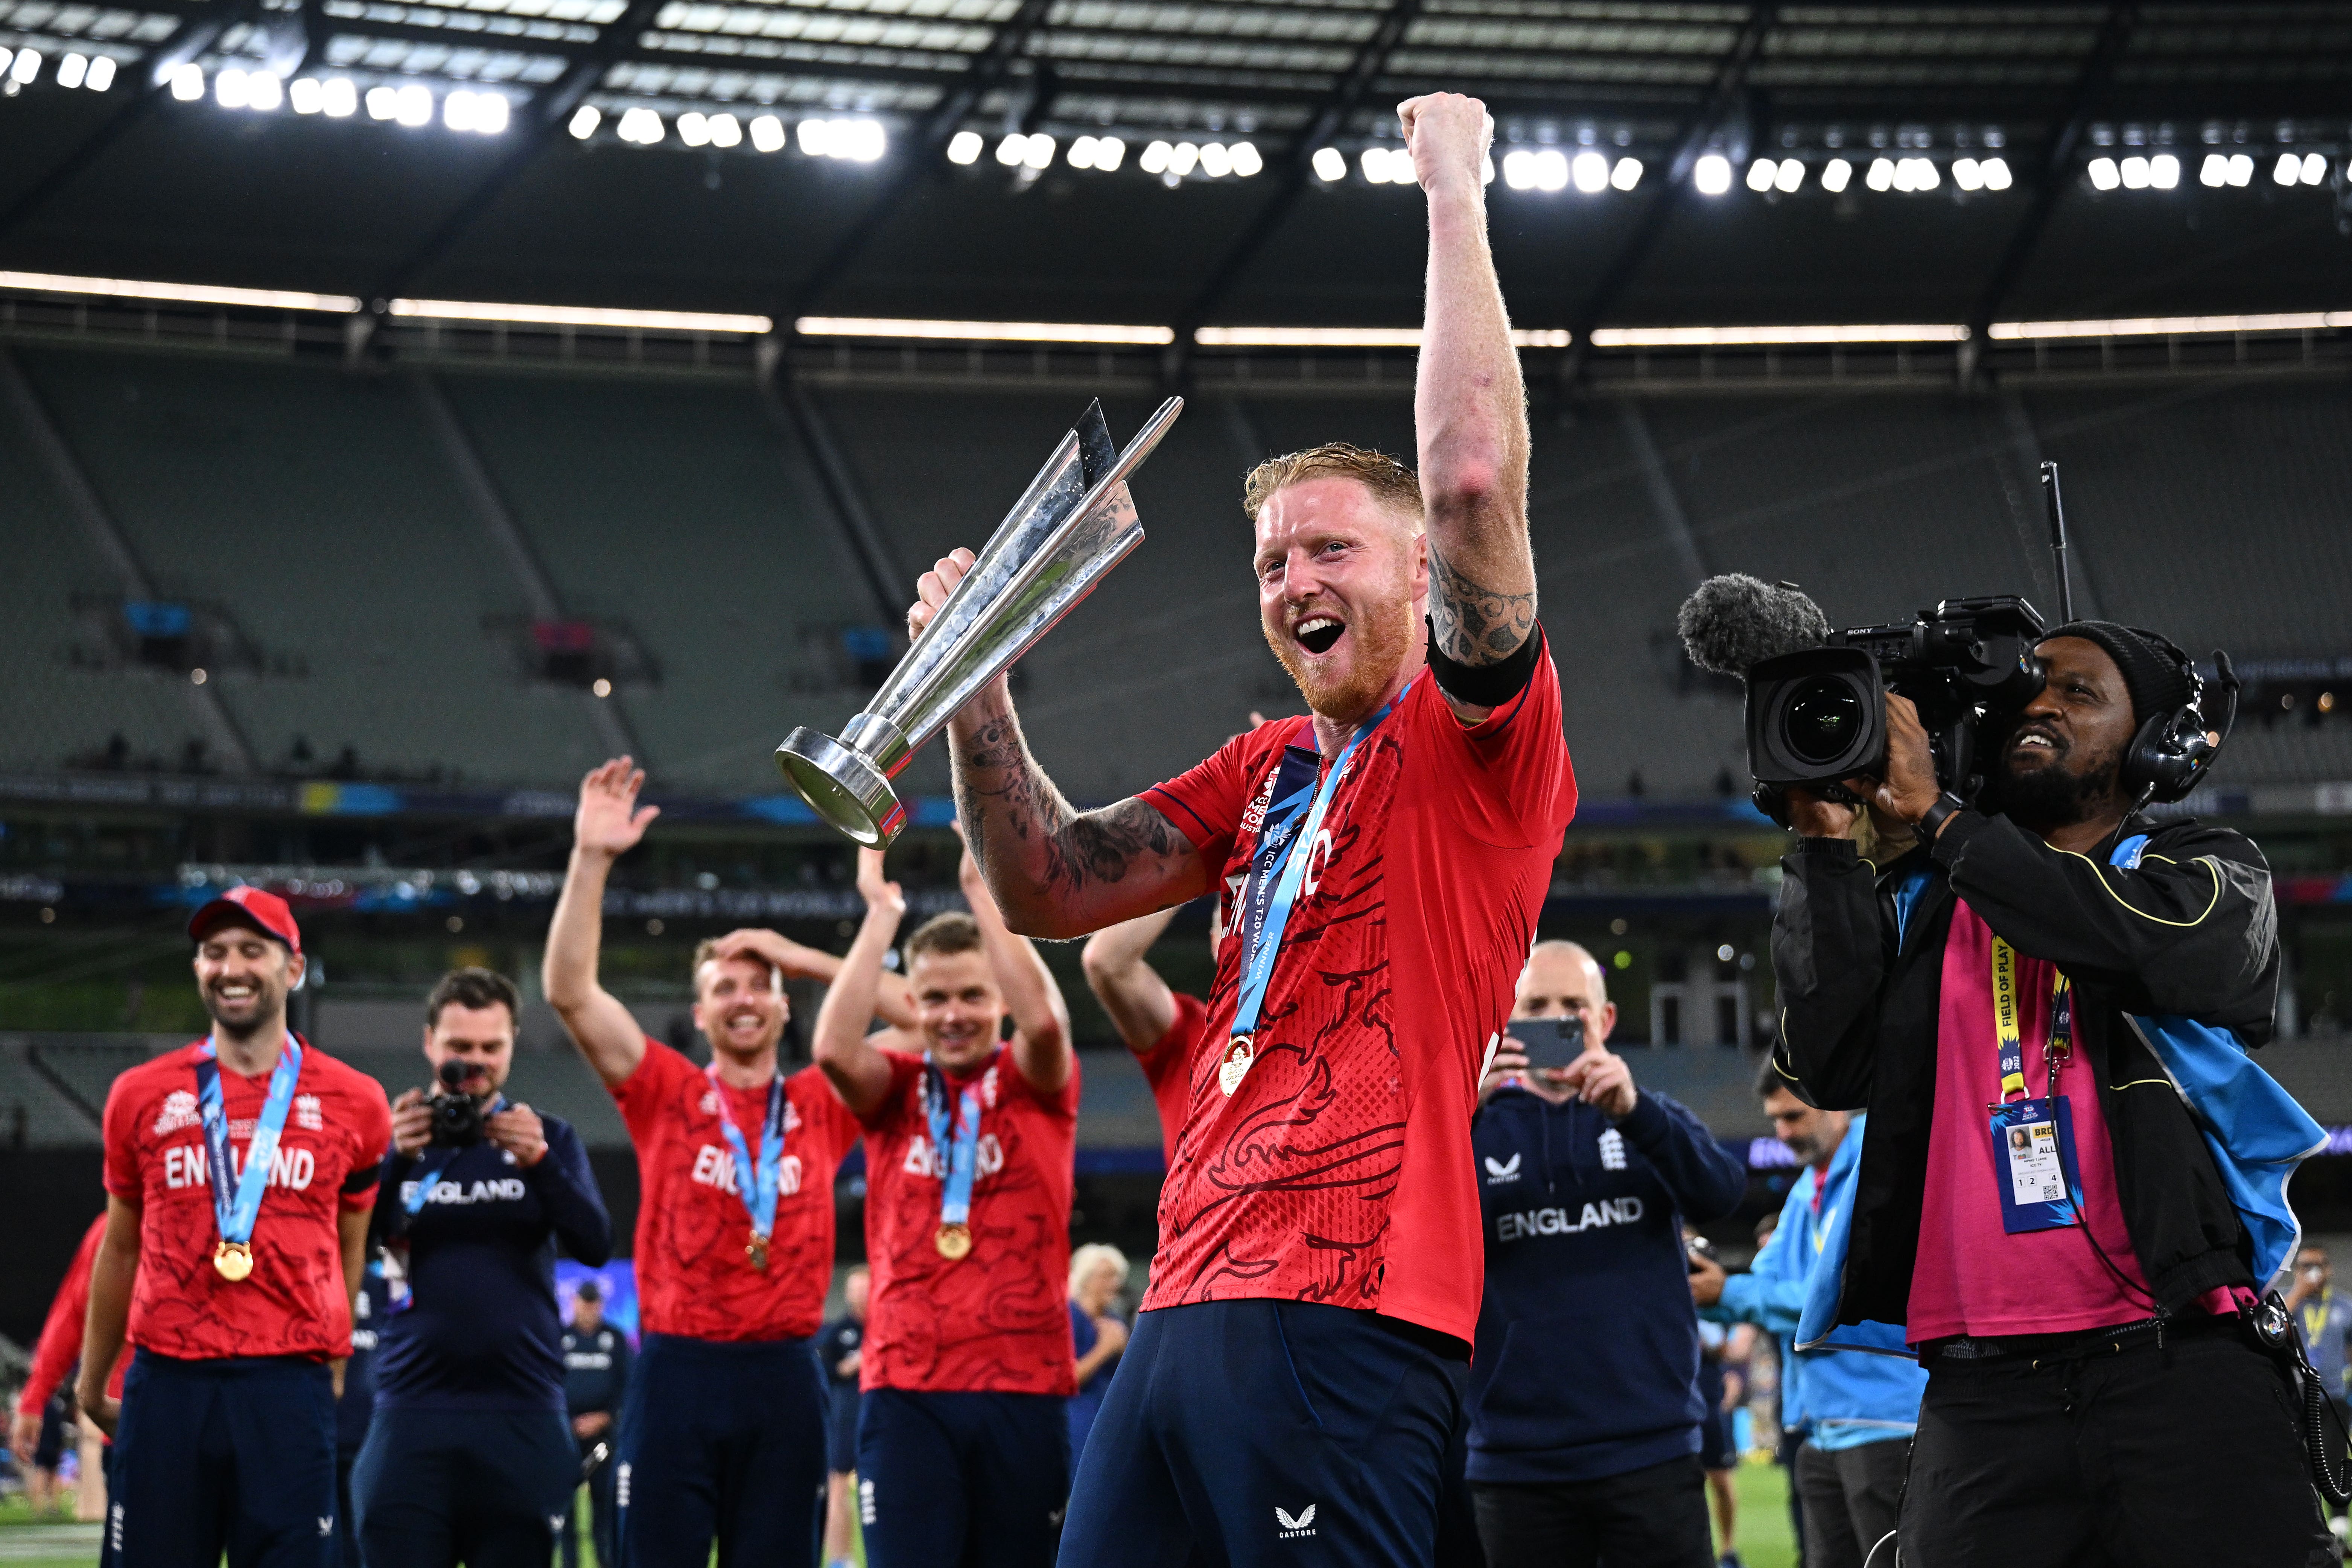 Ben Stokes underpinned another England World Cup win